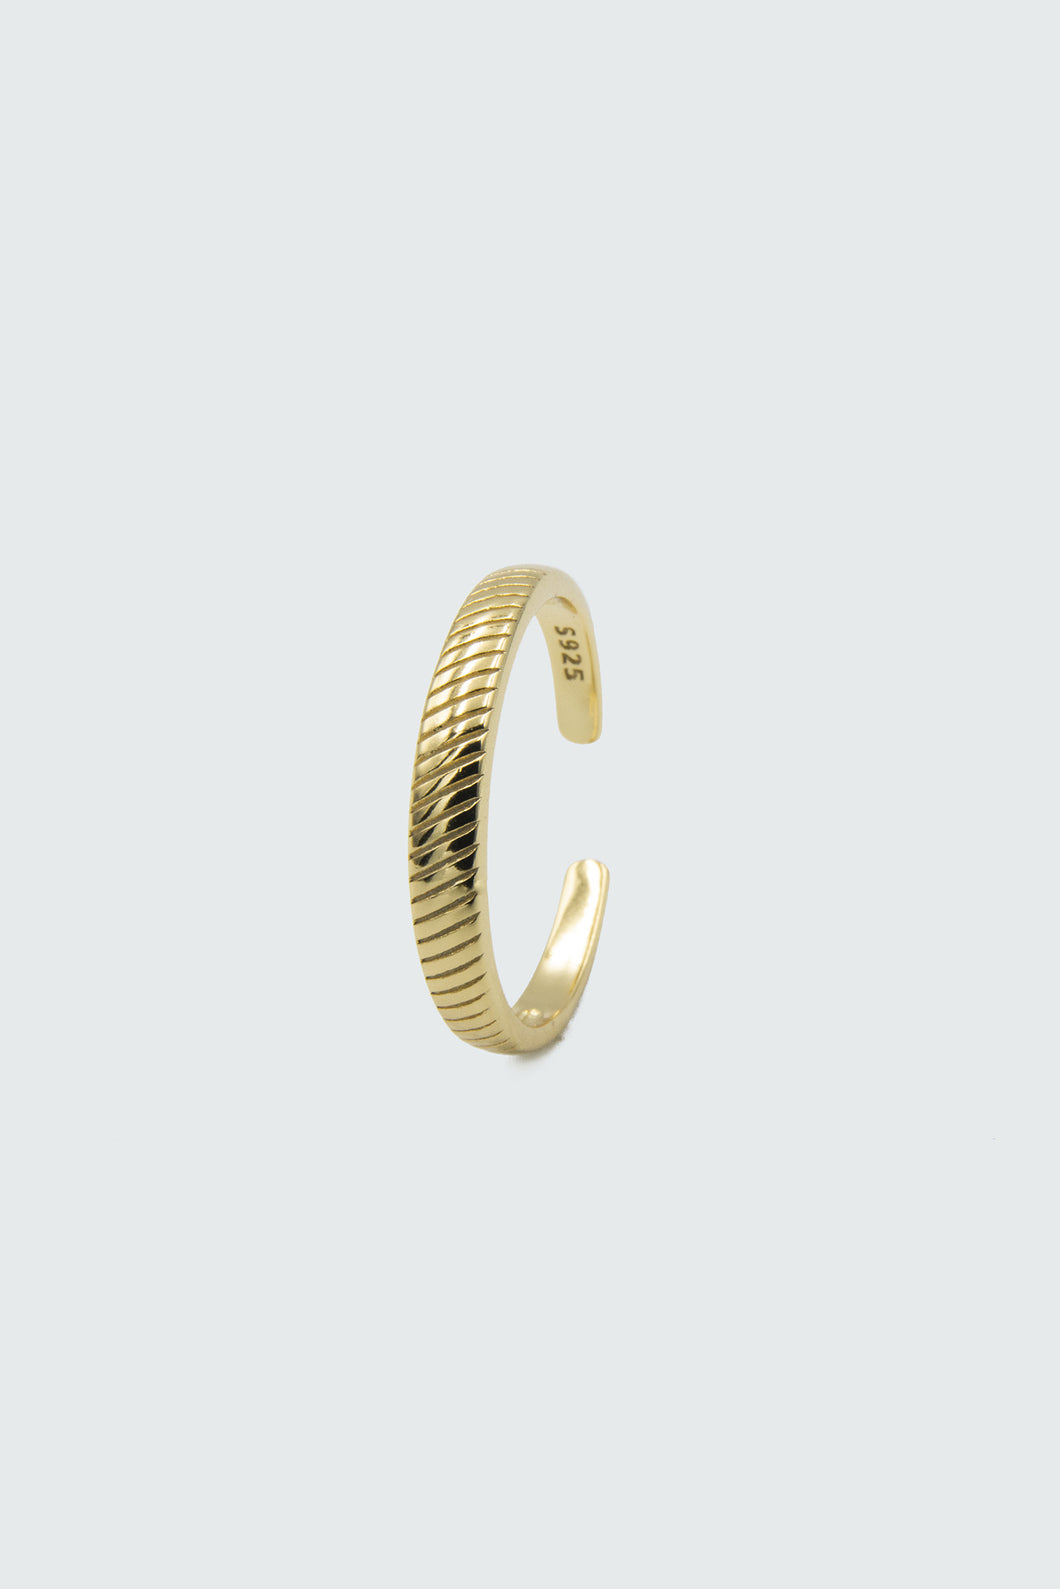 Diagonal Grooved Vintage Dainty Gold Ring